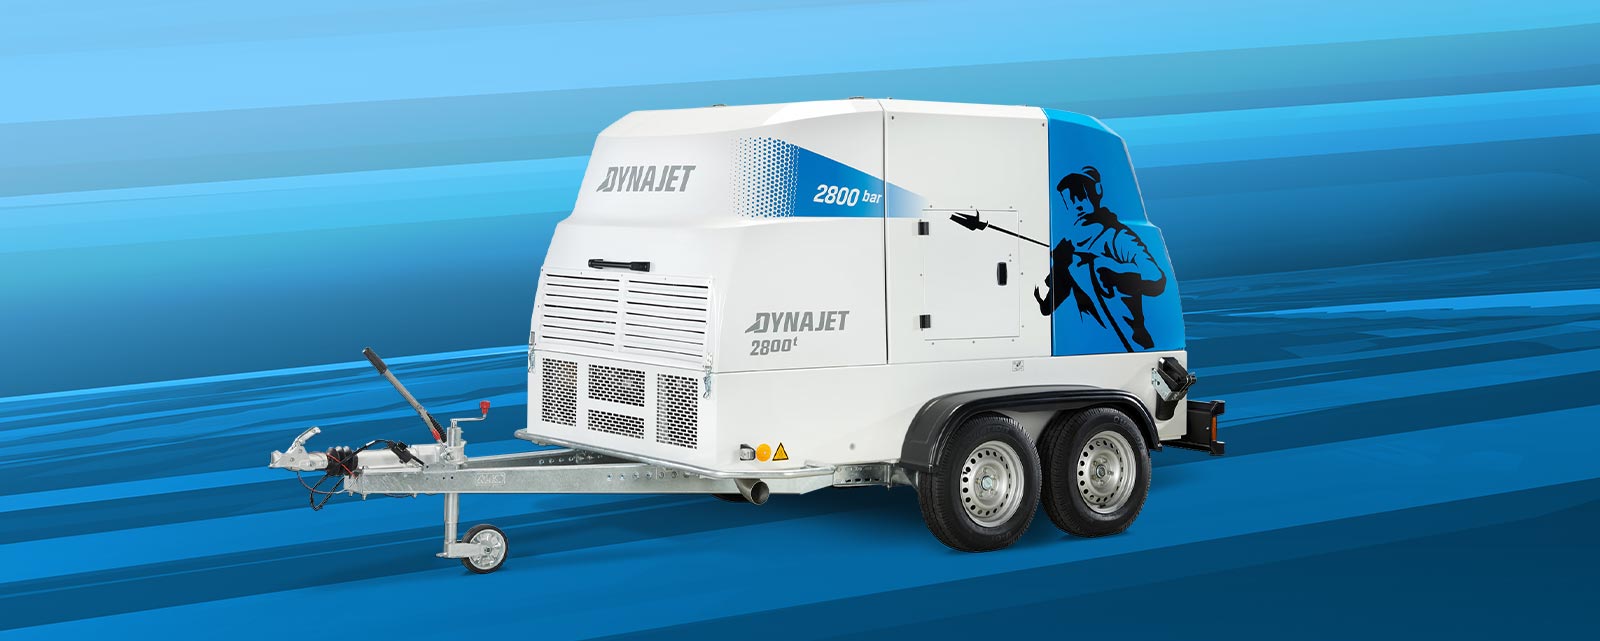 The DYNAJET UHP – in a class of its own – impresses with up to 3,000 bar working pressure and a maximum flow rate of 88 l/m, its functionality, performance and economy